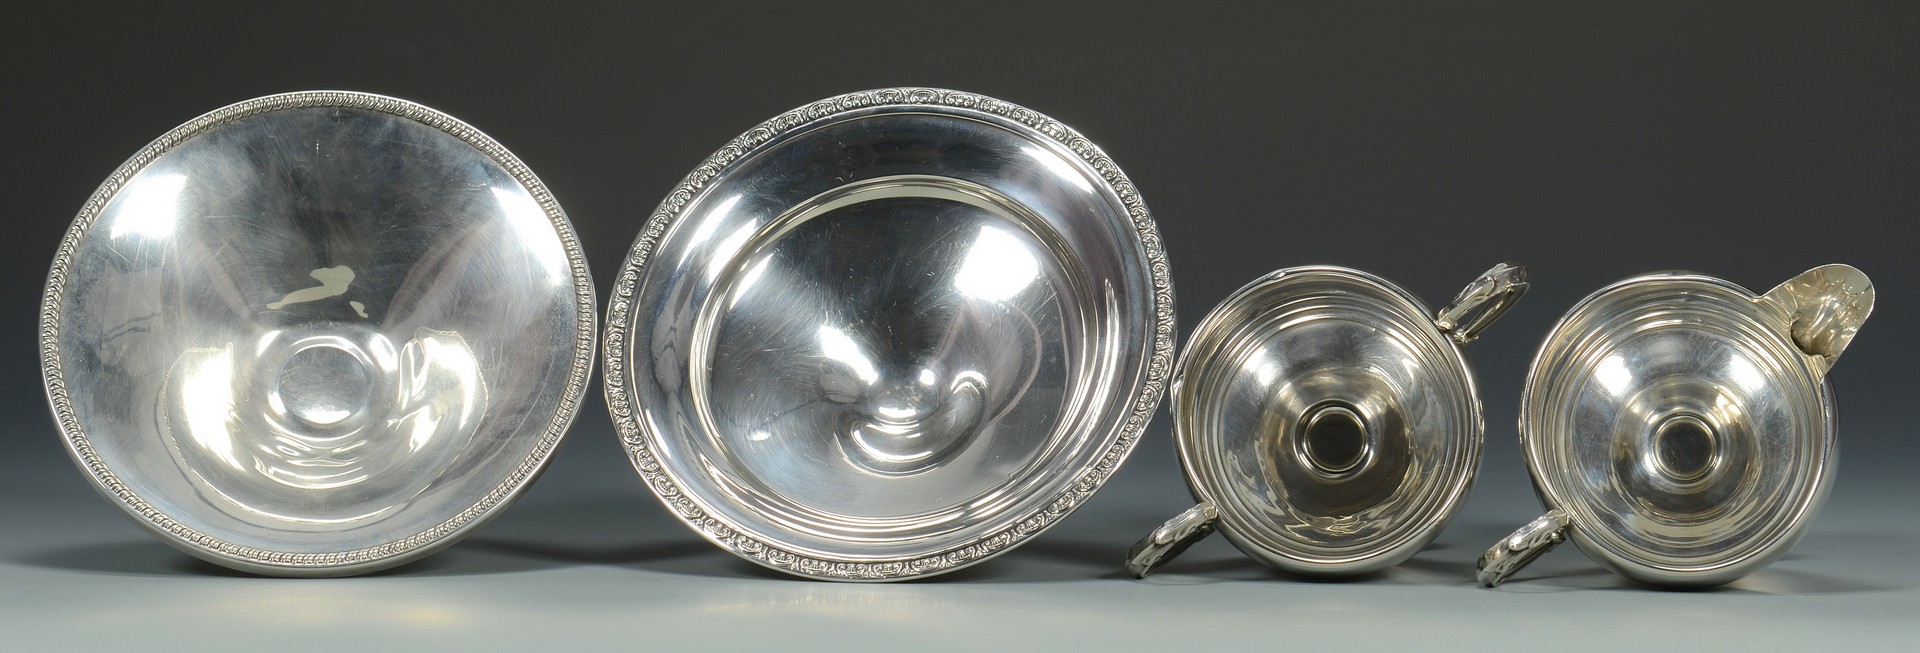 Lot 822: 10 Weighted Sterling Items